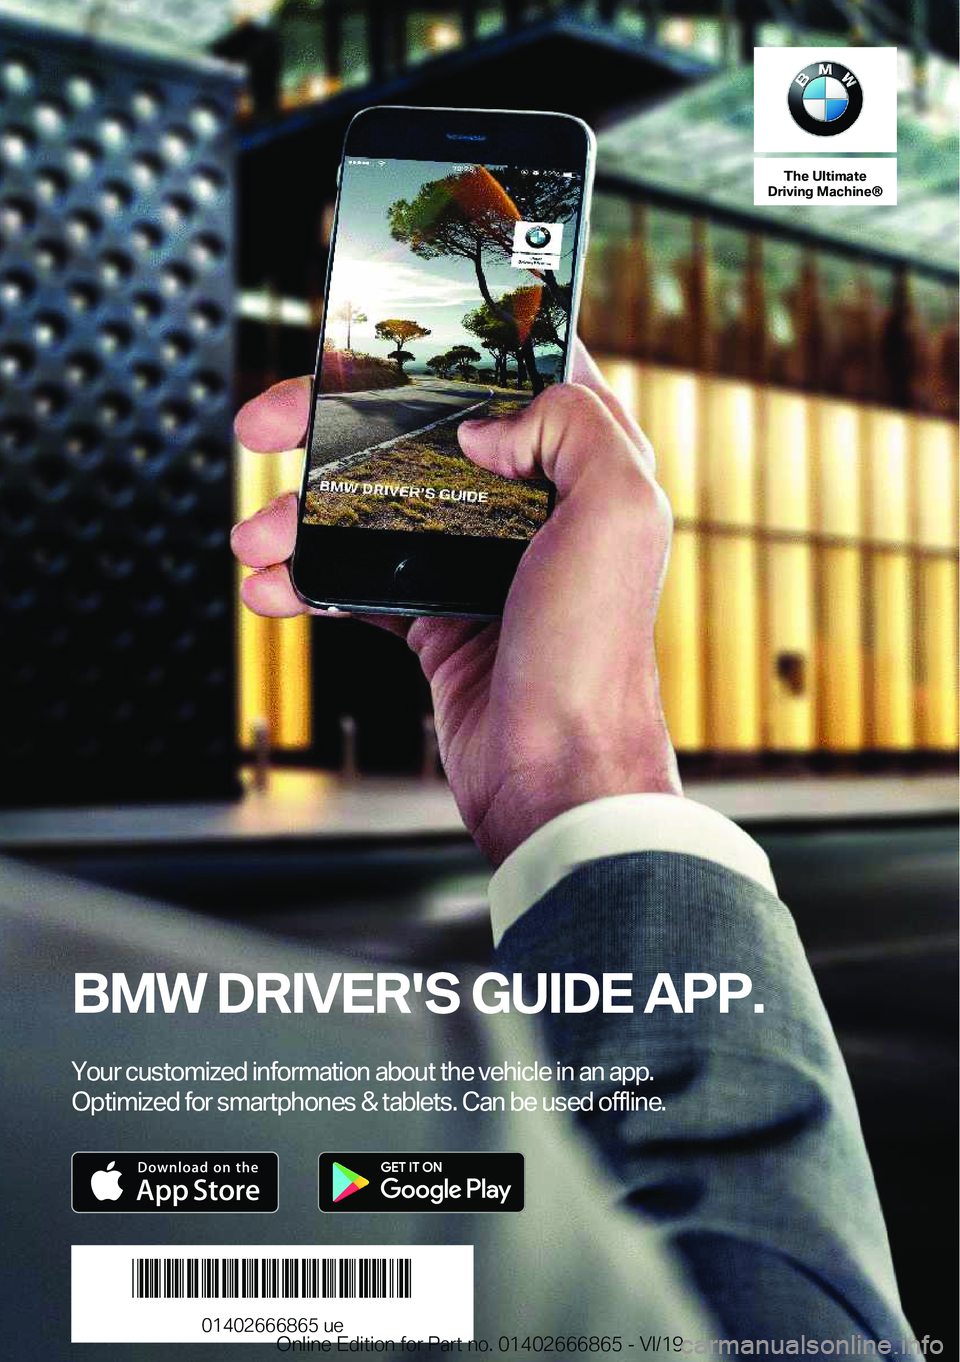 BMW X3 M 2020  Owners Manual �T�h�e��U�l�t�i�m�a�t�e
�D�r�i�v�i�n�g��M�a�c�h�i�n�e�n
�B�M�W��D�R�I�V�E�R�'�S��G�U�I�D�E��A�P�P�.
�Y�o�u�r��c�u�s�t�o�m�i�z�e�d��i�n�f�o�r�m�a�t�i�o�n��a�b�o�u�t��t�h�e��v�e�h�i�c�l�e�